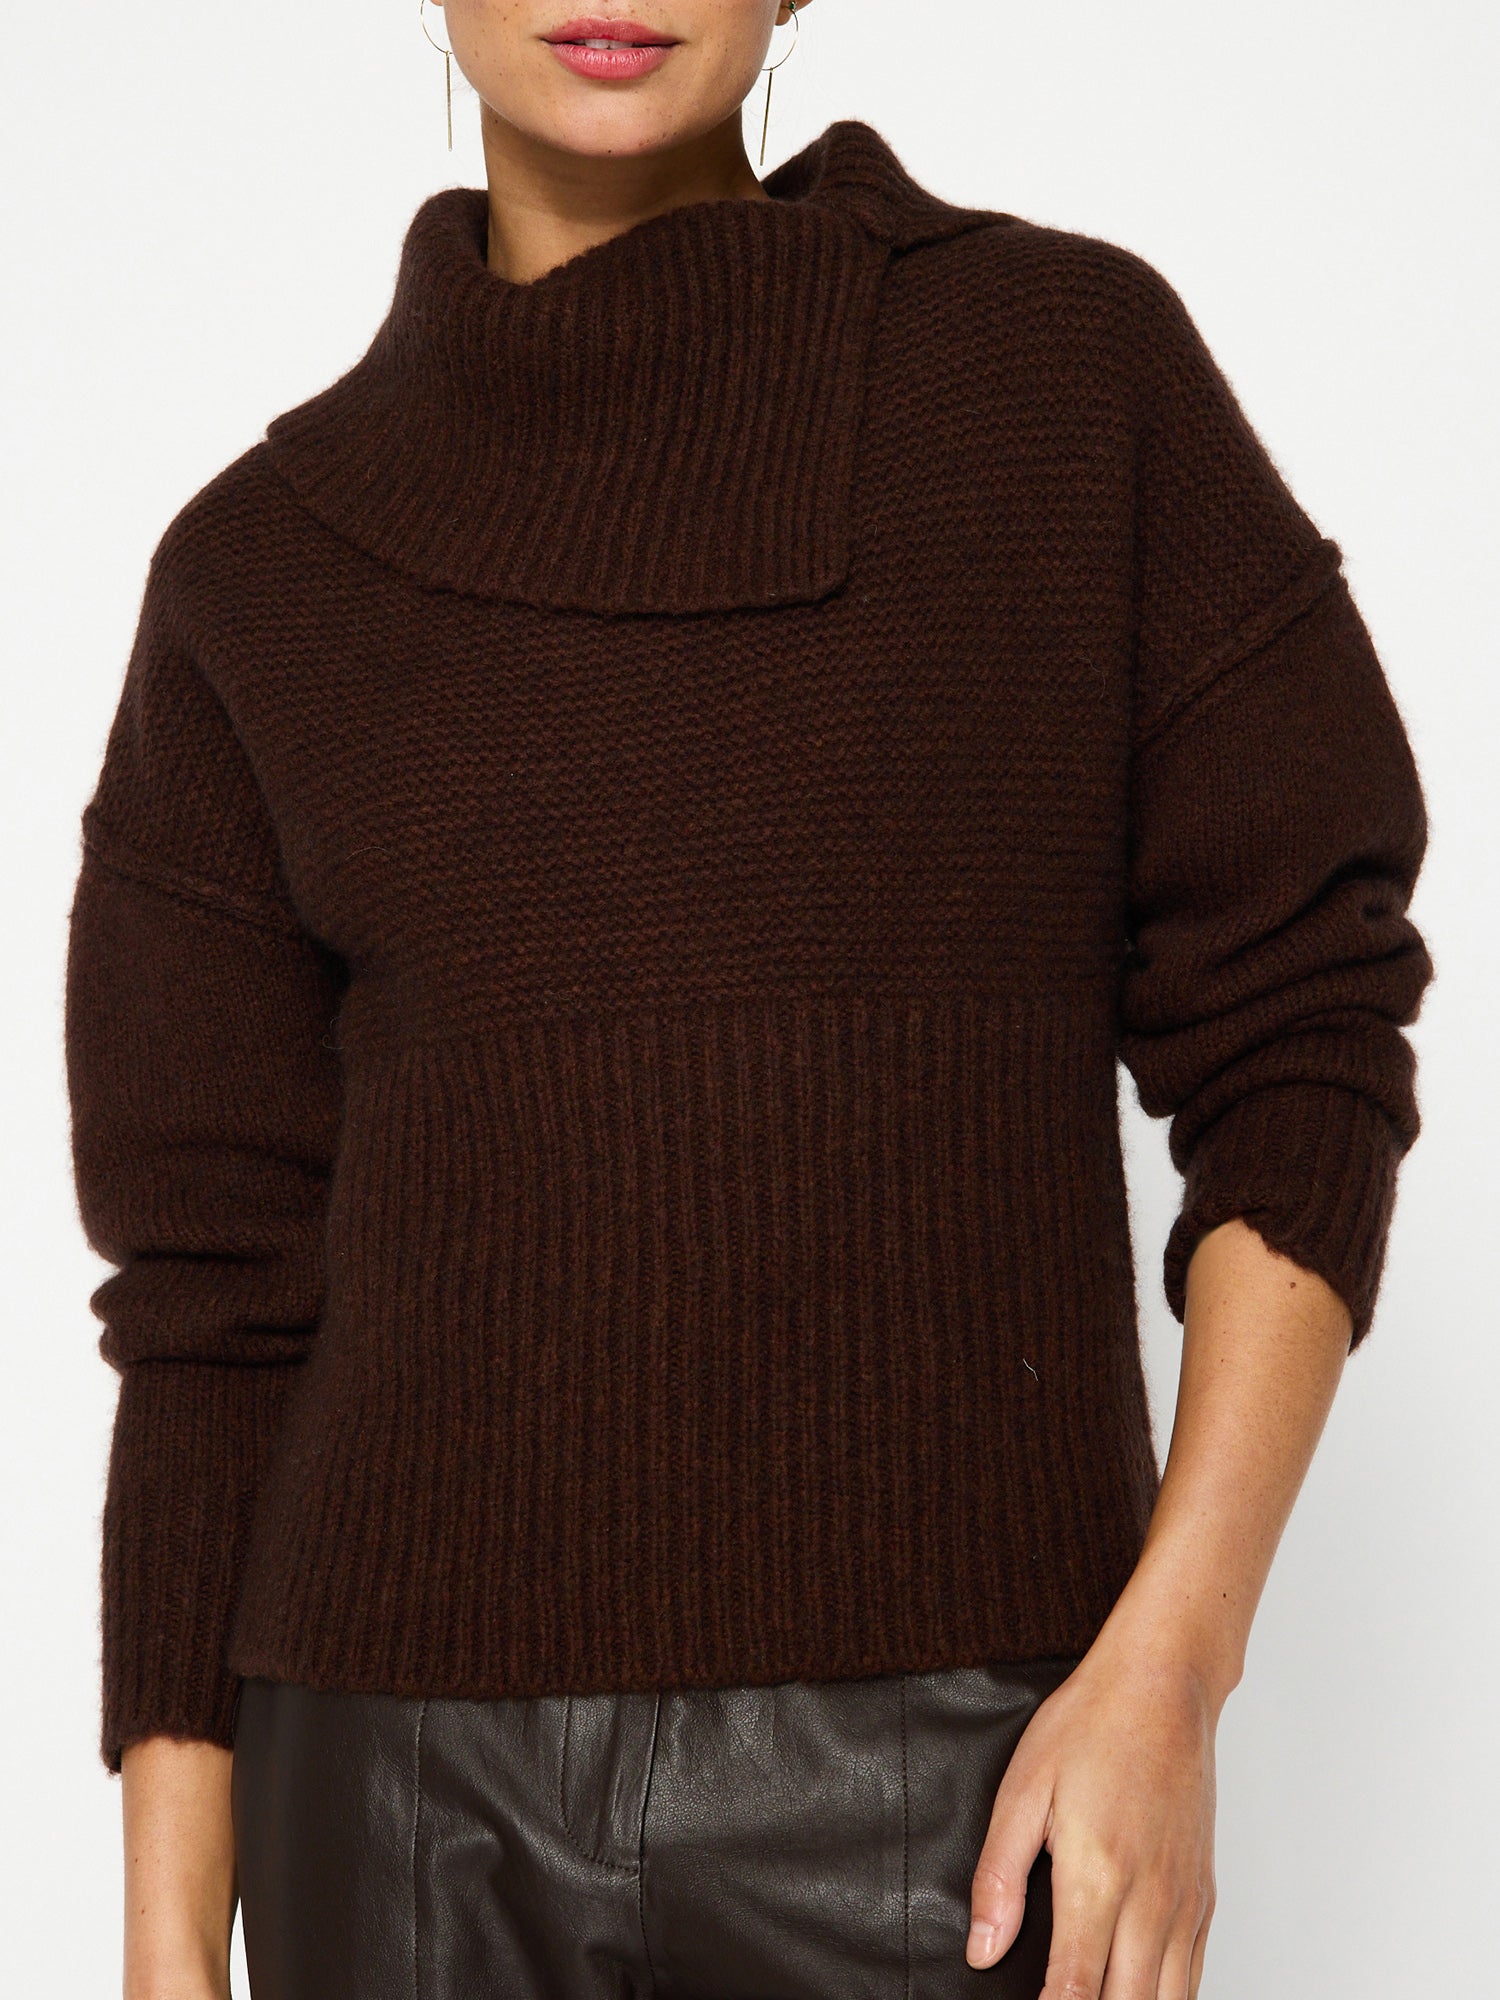 Elian overlap cowlneck wool cashmere brown sweater front view 2